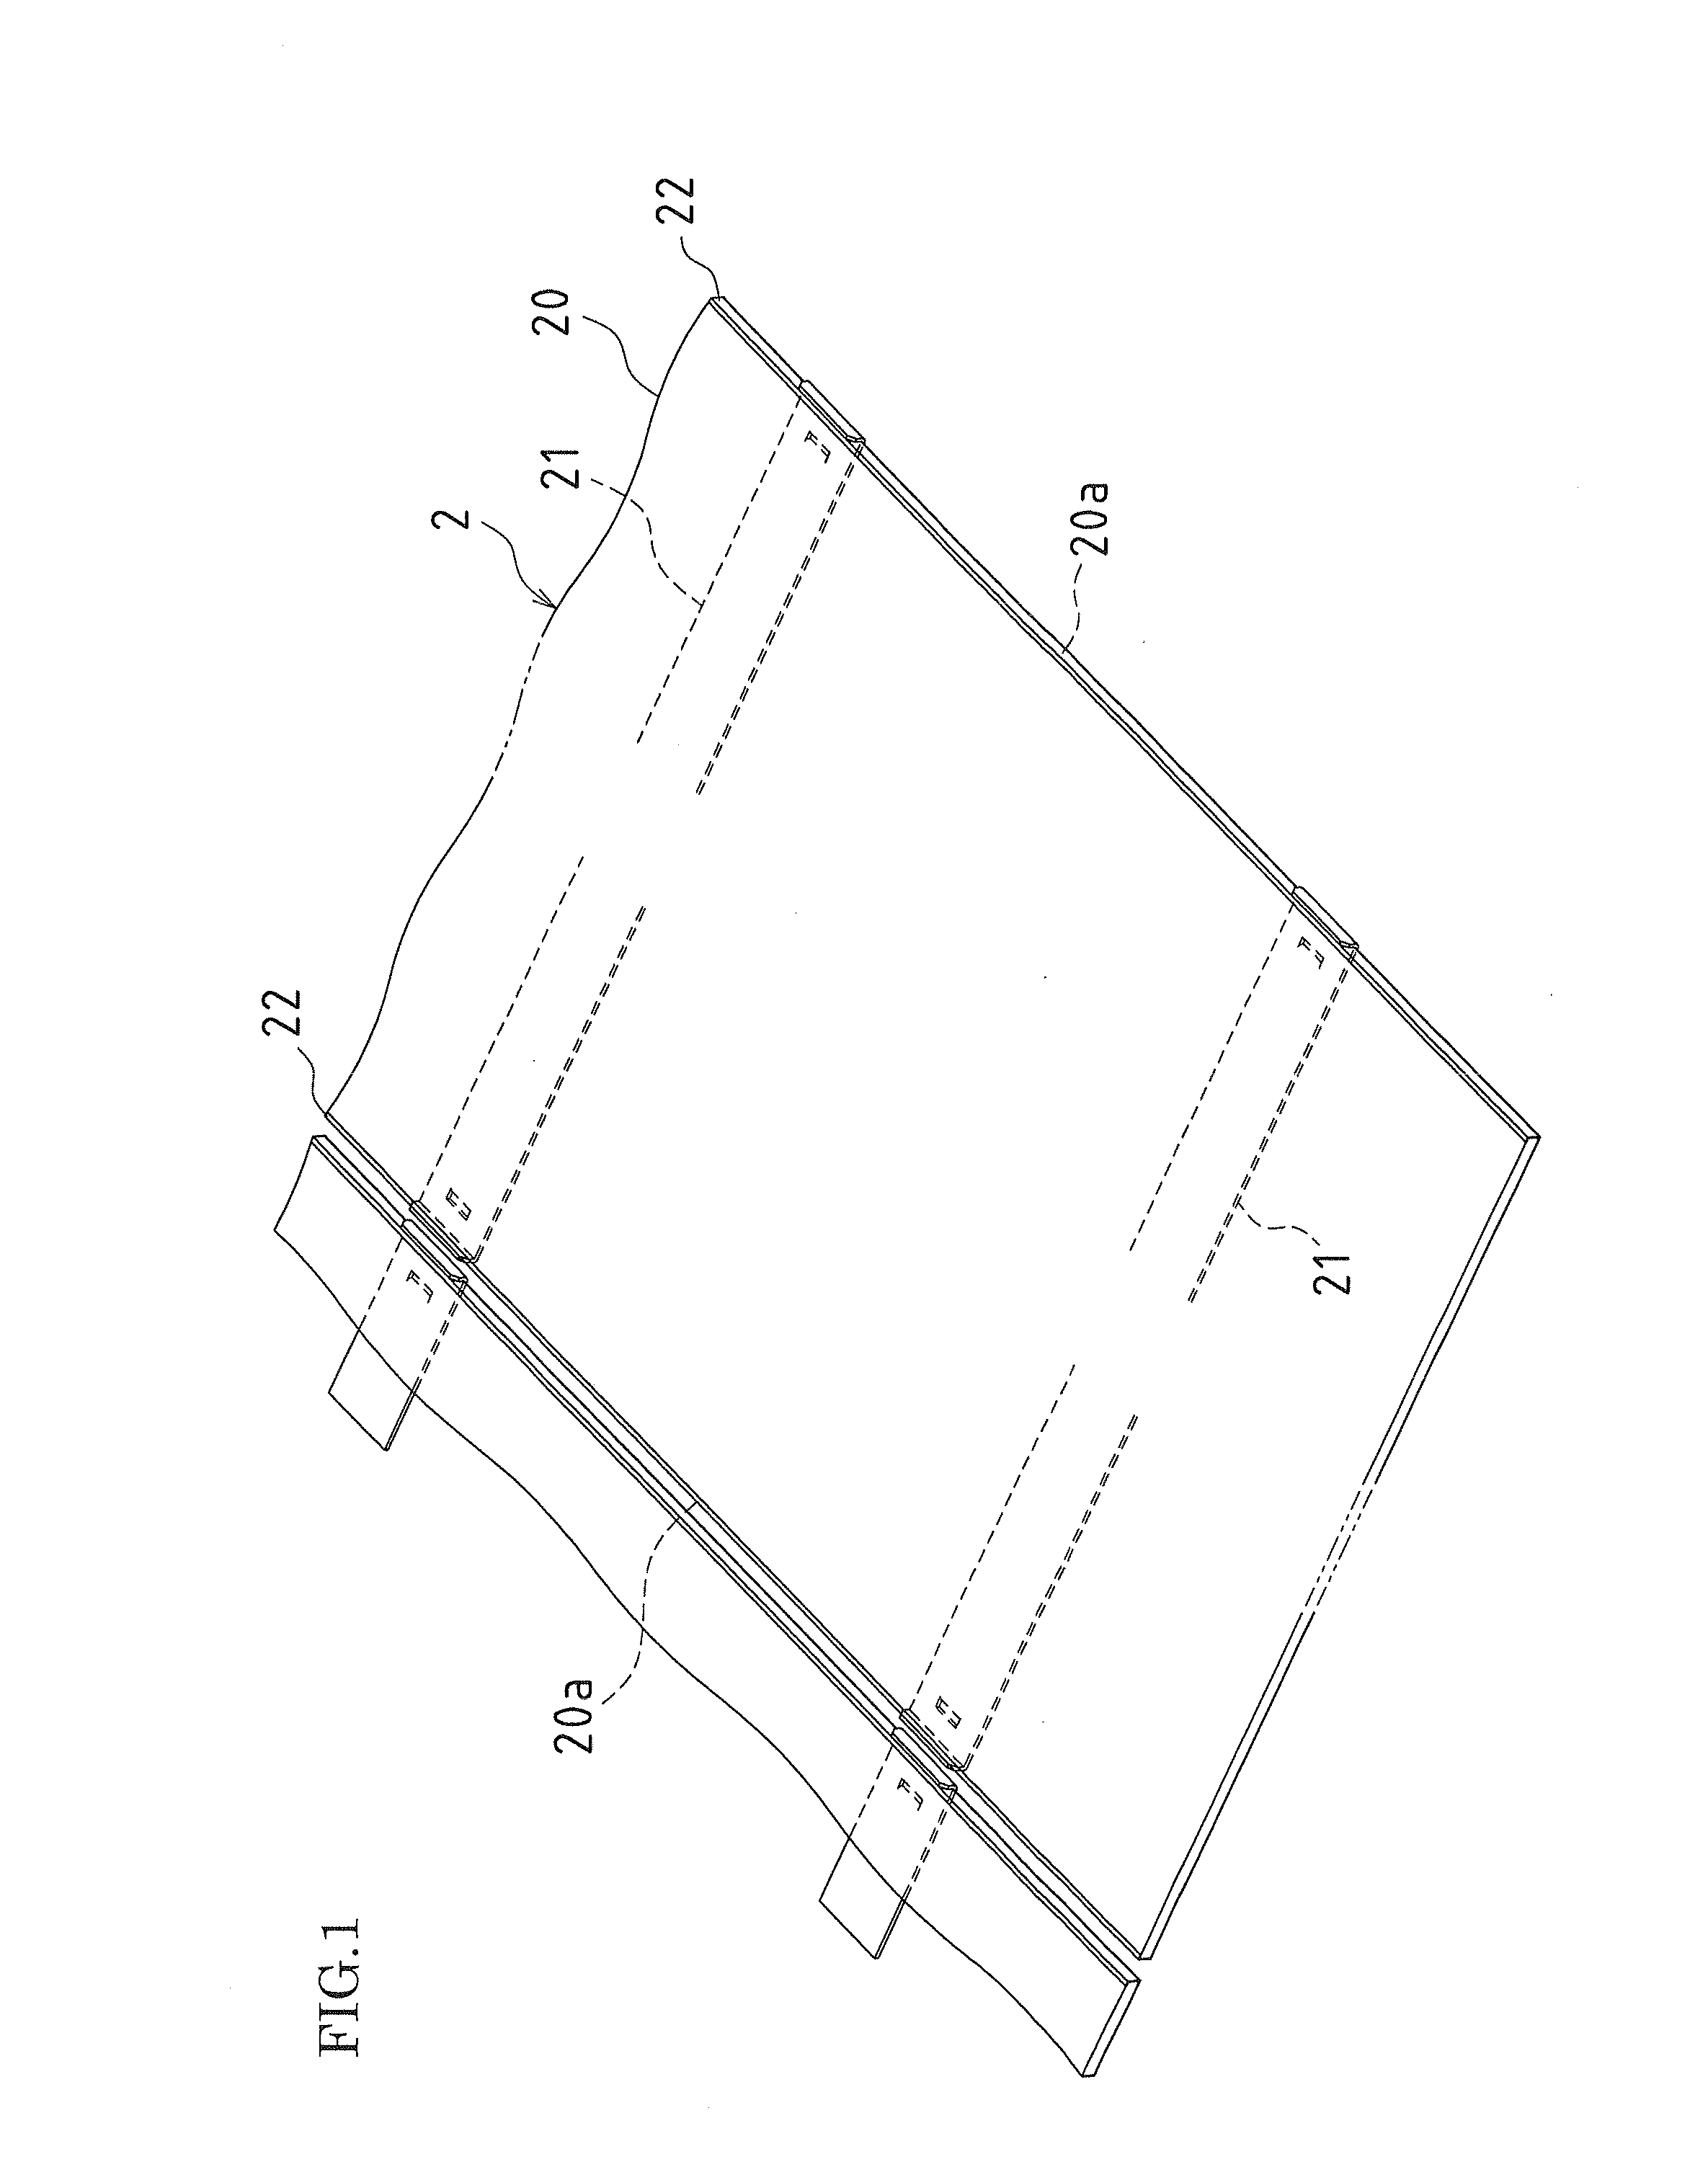 Solar cell module, solar cell attachment stand, photovoltaic power generating system